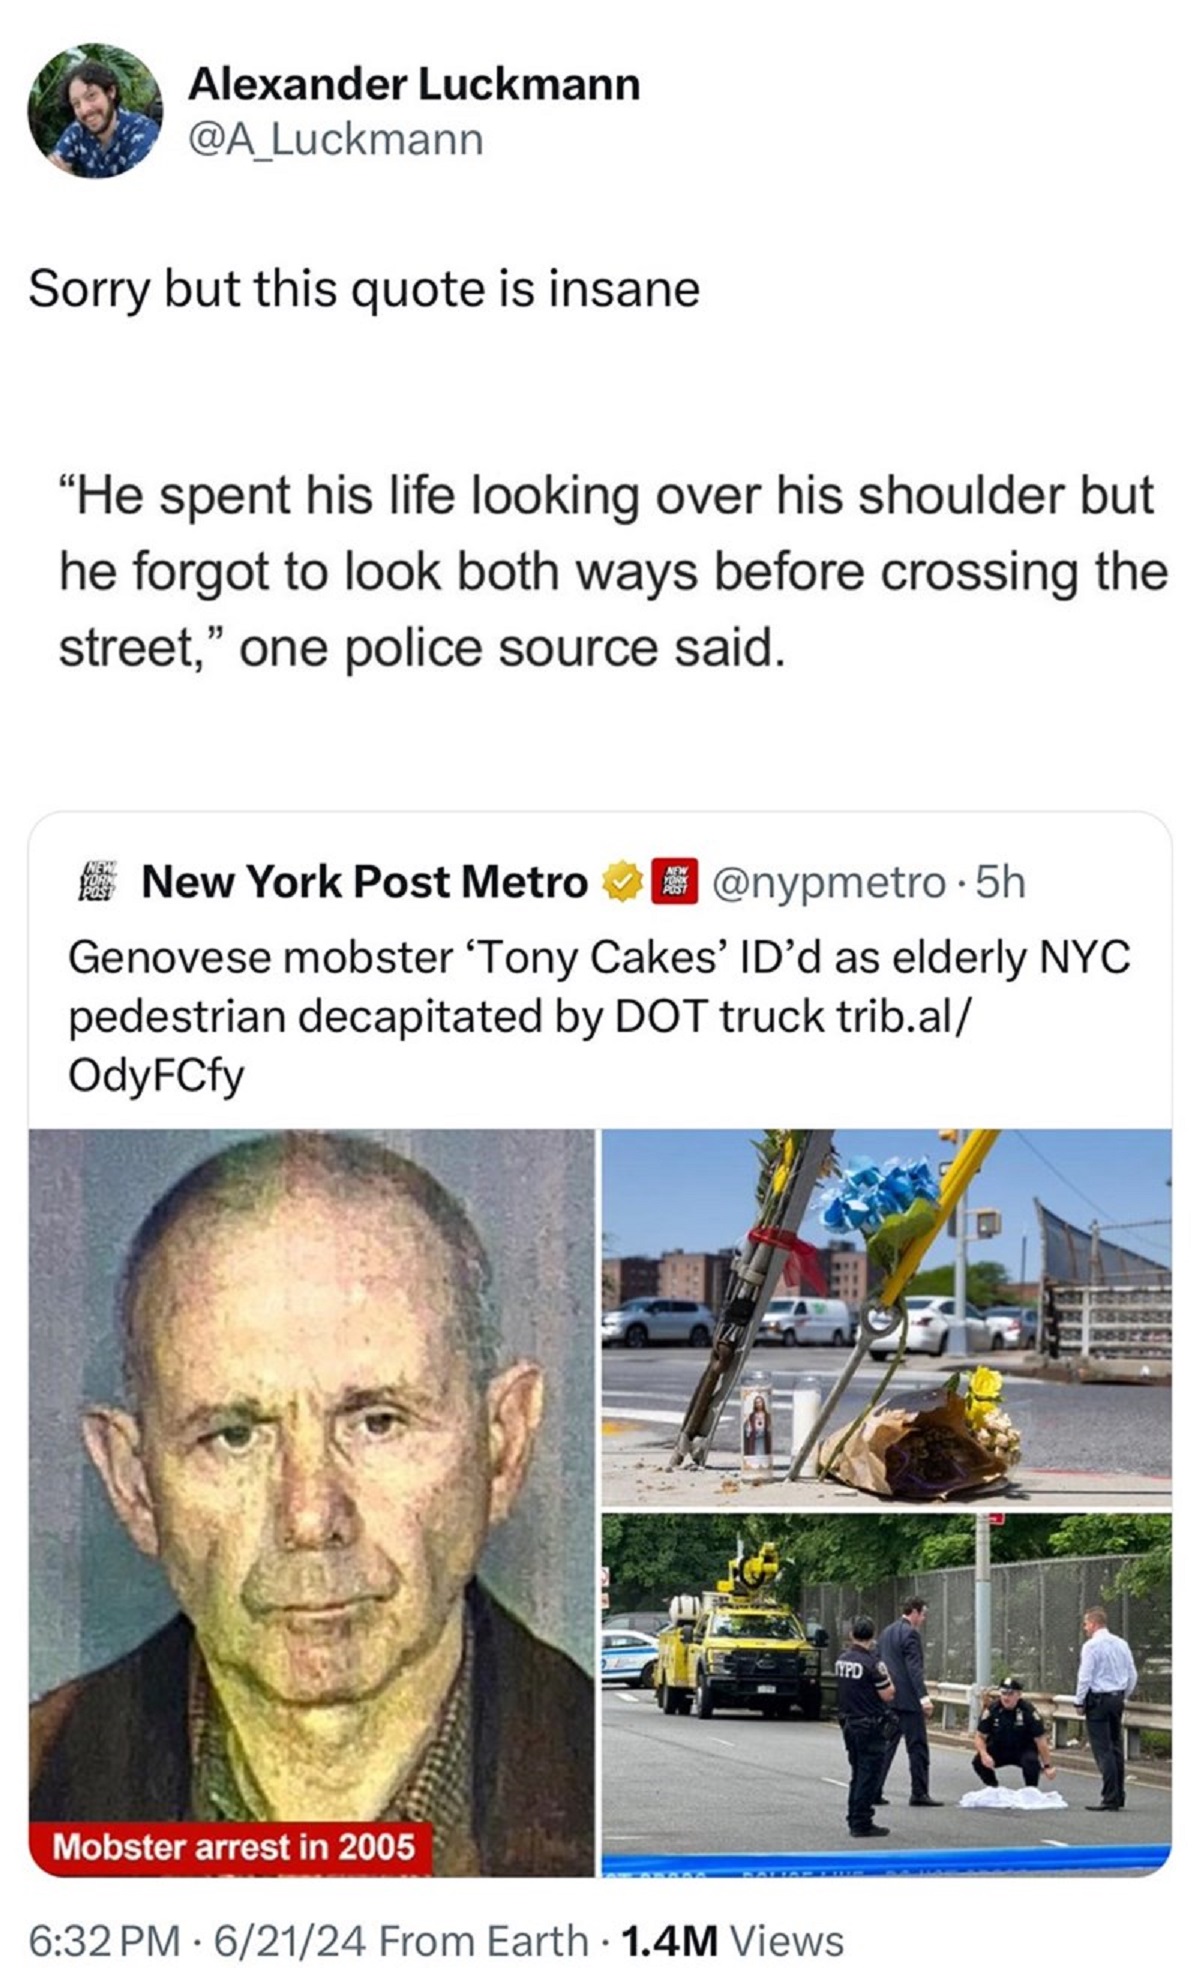 tony cakes mobster - Alexander Luckmann Sorry but this quote is insane "He spent his life looking over his shoulder but he forgot to look both ways before crossing the street," one police source said. New York Post Metro 5h Genovese mobster Tony Cakes' Id